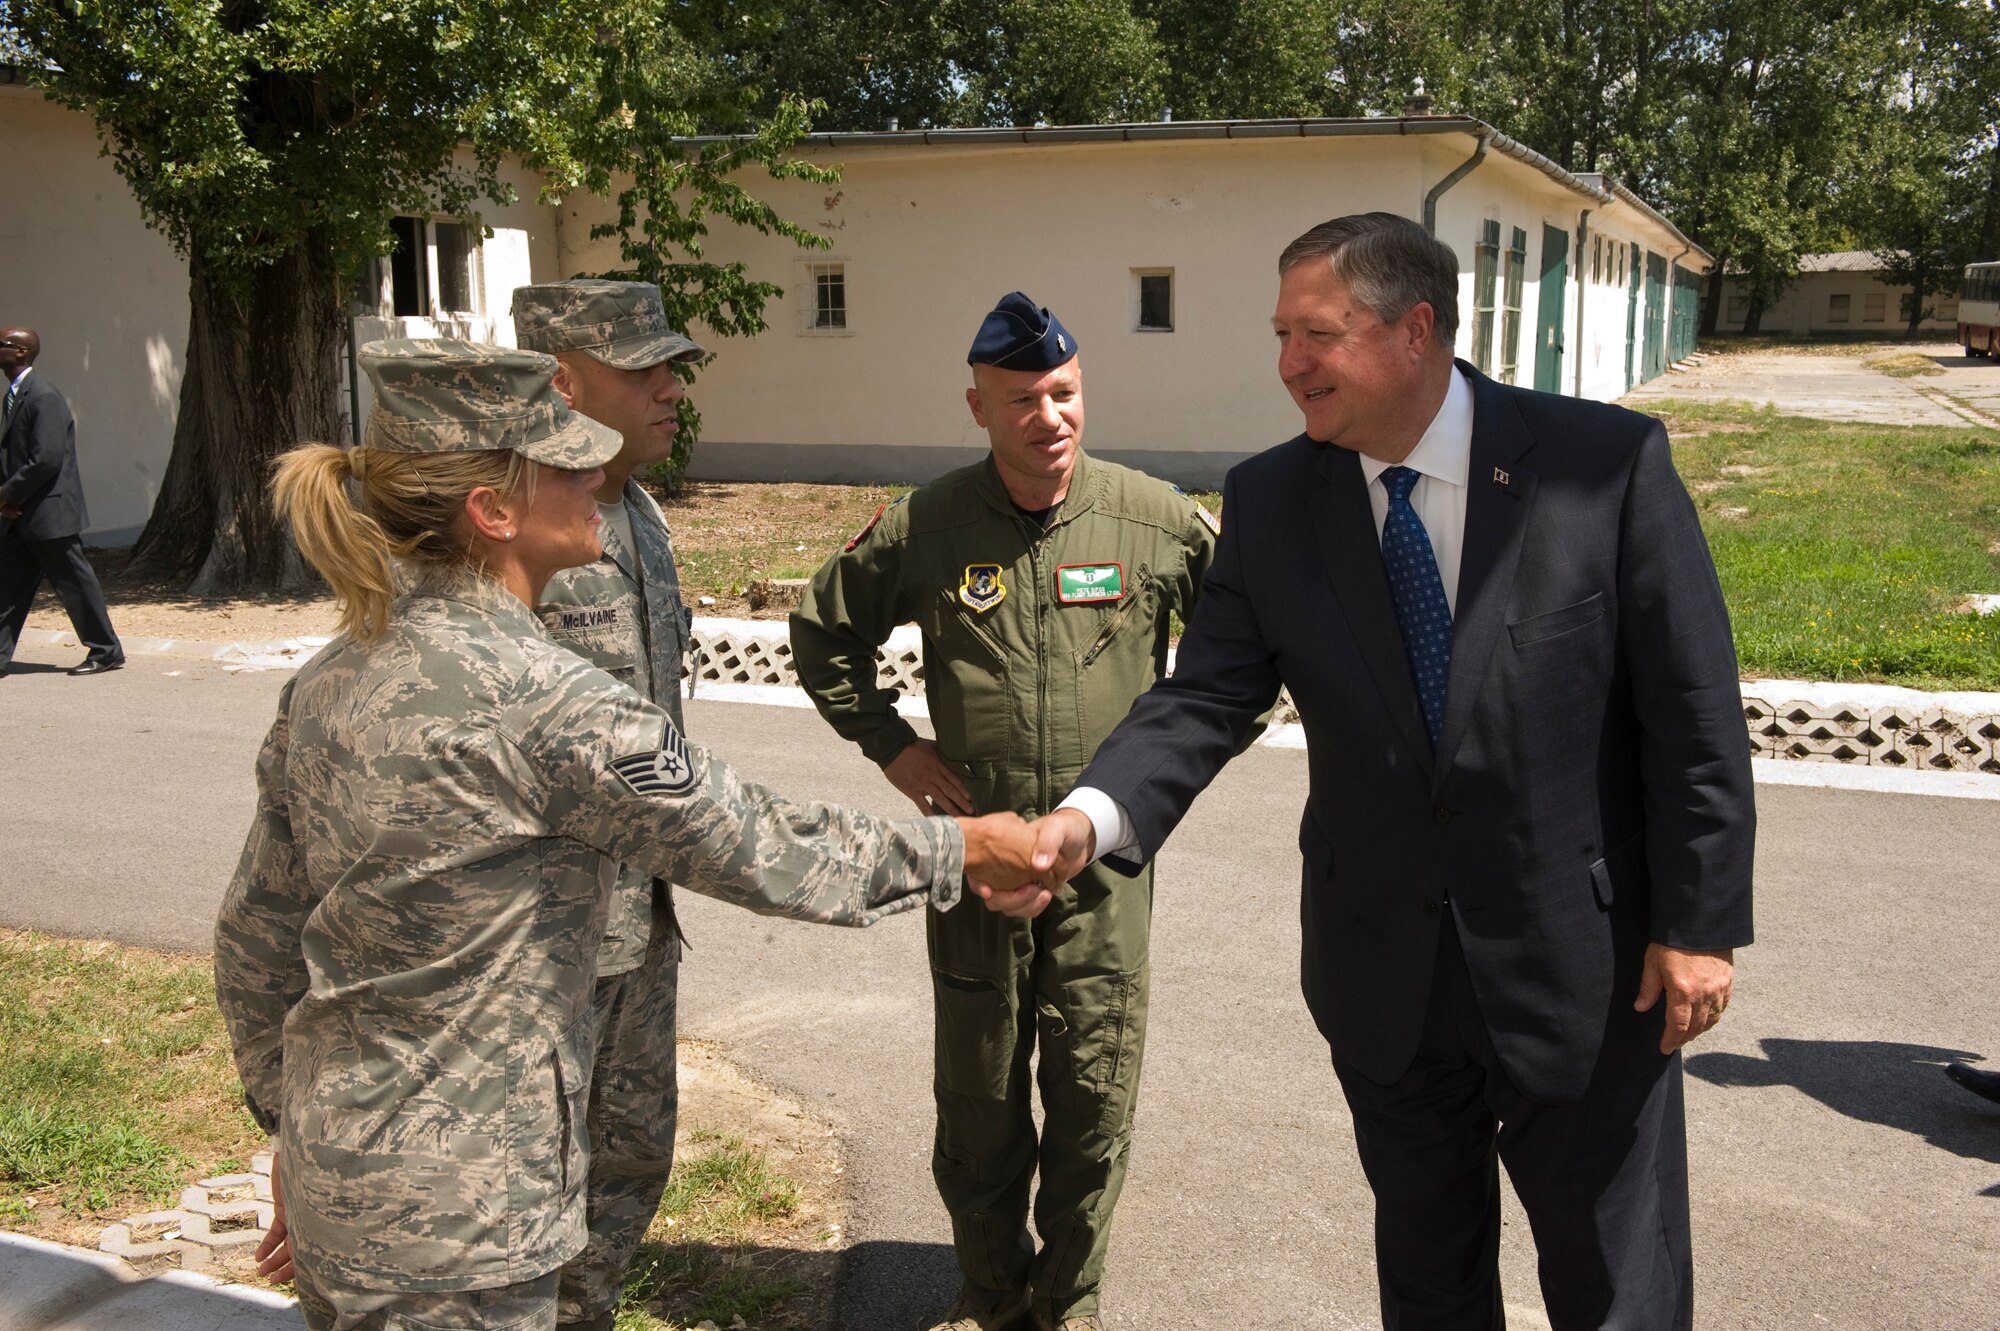 Secretary of the Air Force Michael Donley meets Staff Sgt. Theiesa Morgan and Tech. Sgt. Jason McIlvaine, both independent duty medical technicians, and Lt. Col. Pete Sipos, HAW Medical Director, during a tour of Pápa Air Base, Hungary, July 11, 2012. The secretary visited the HAW to speak with Airmen about the direction of the Air Force, meet with them on the job and learn what's on their minds. (U.S. Air Force photo/Master Sgt. Wayne Clark)